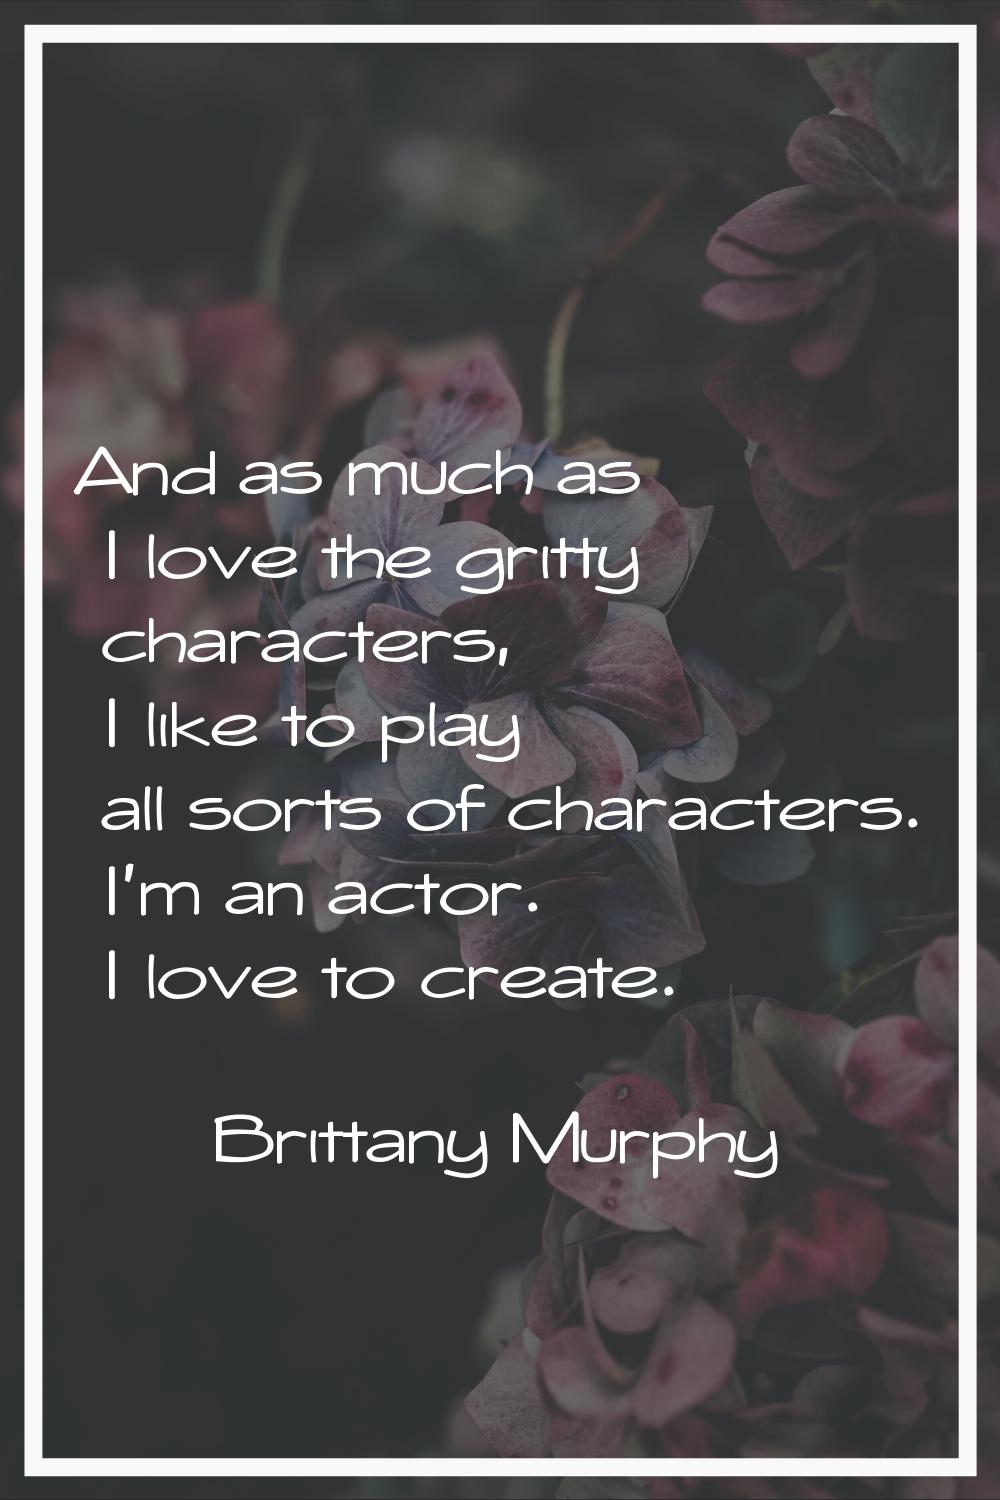 And as much as I love the gritty characters, I like to play all sorts of characters. I'm an actor. 